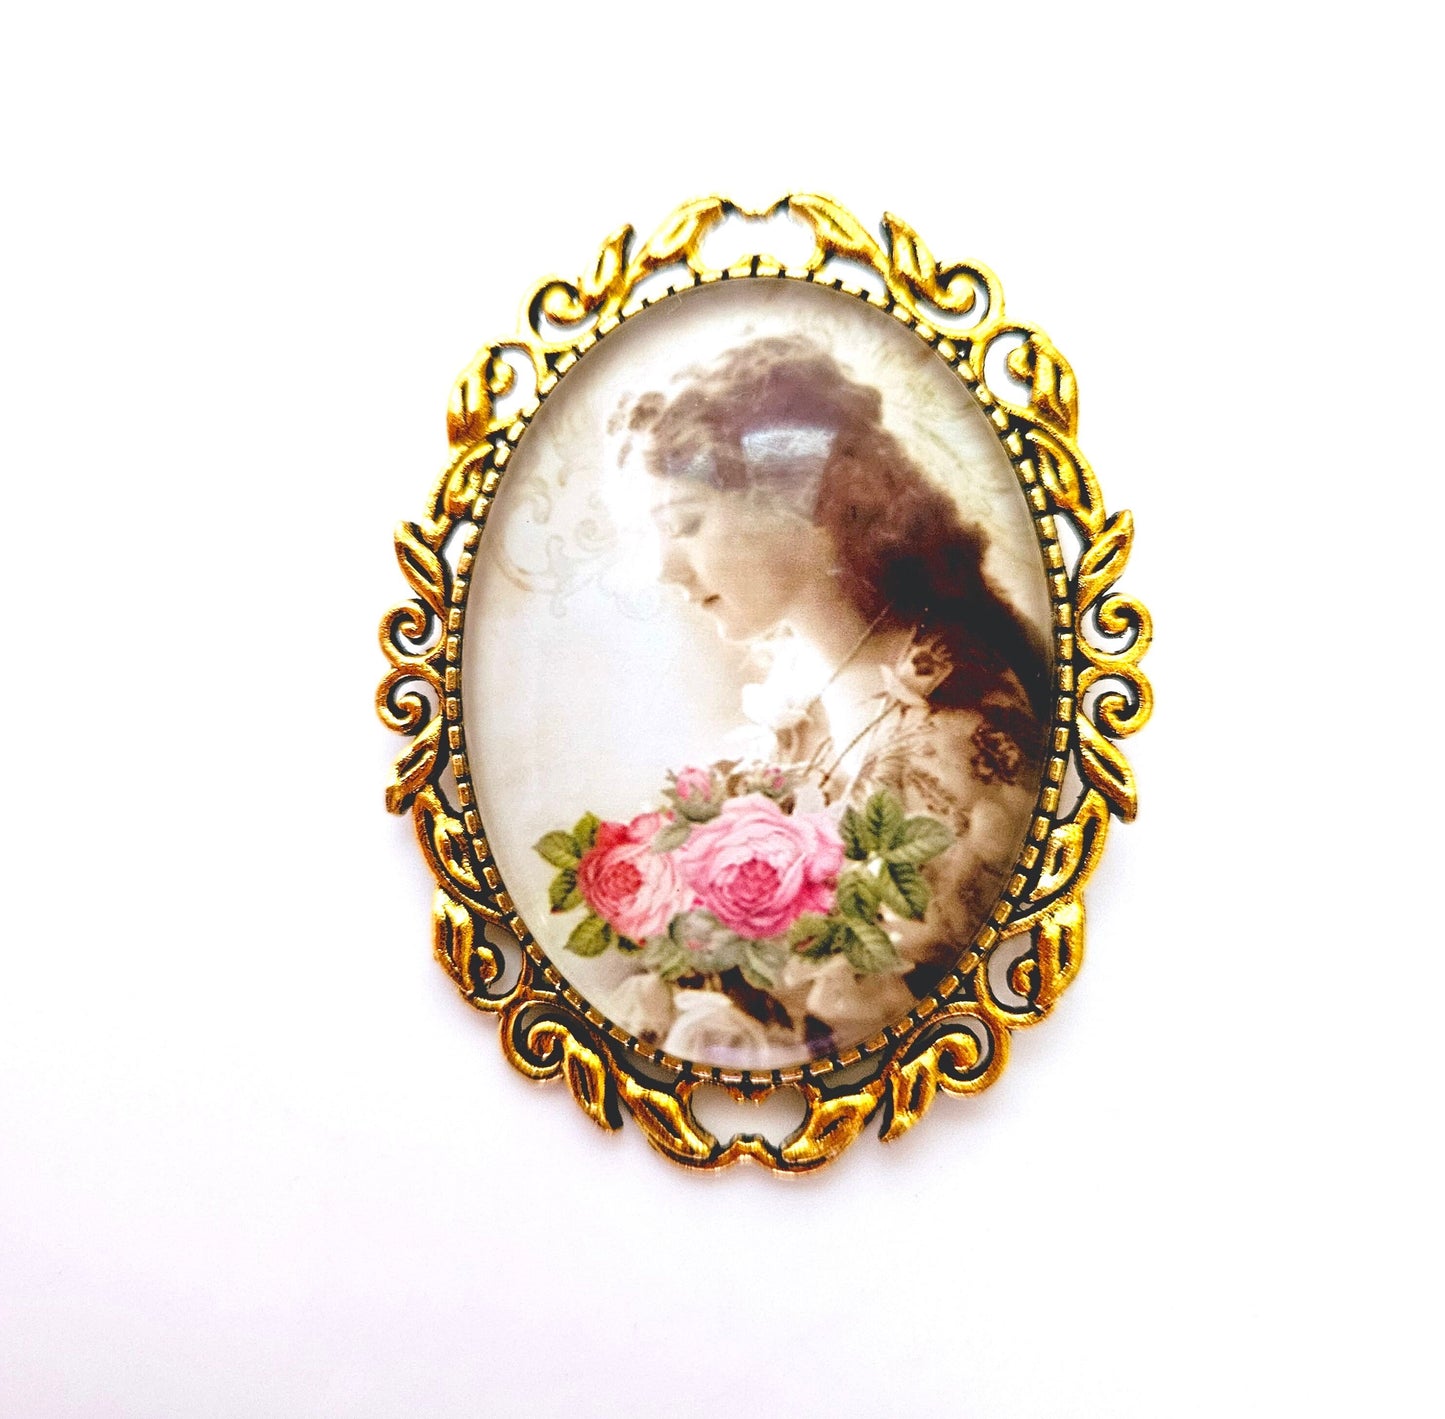 Vintage Style Cameo Brooch, Victorian Lady Portrait Brooch, Gold Plated, Lady With Flowers Pin, Stylish Cameo Pin, Brooches For Women